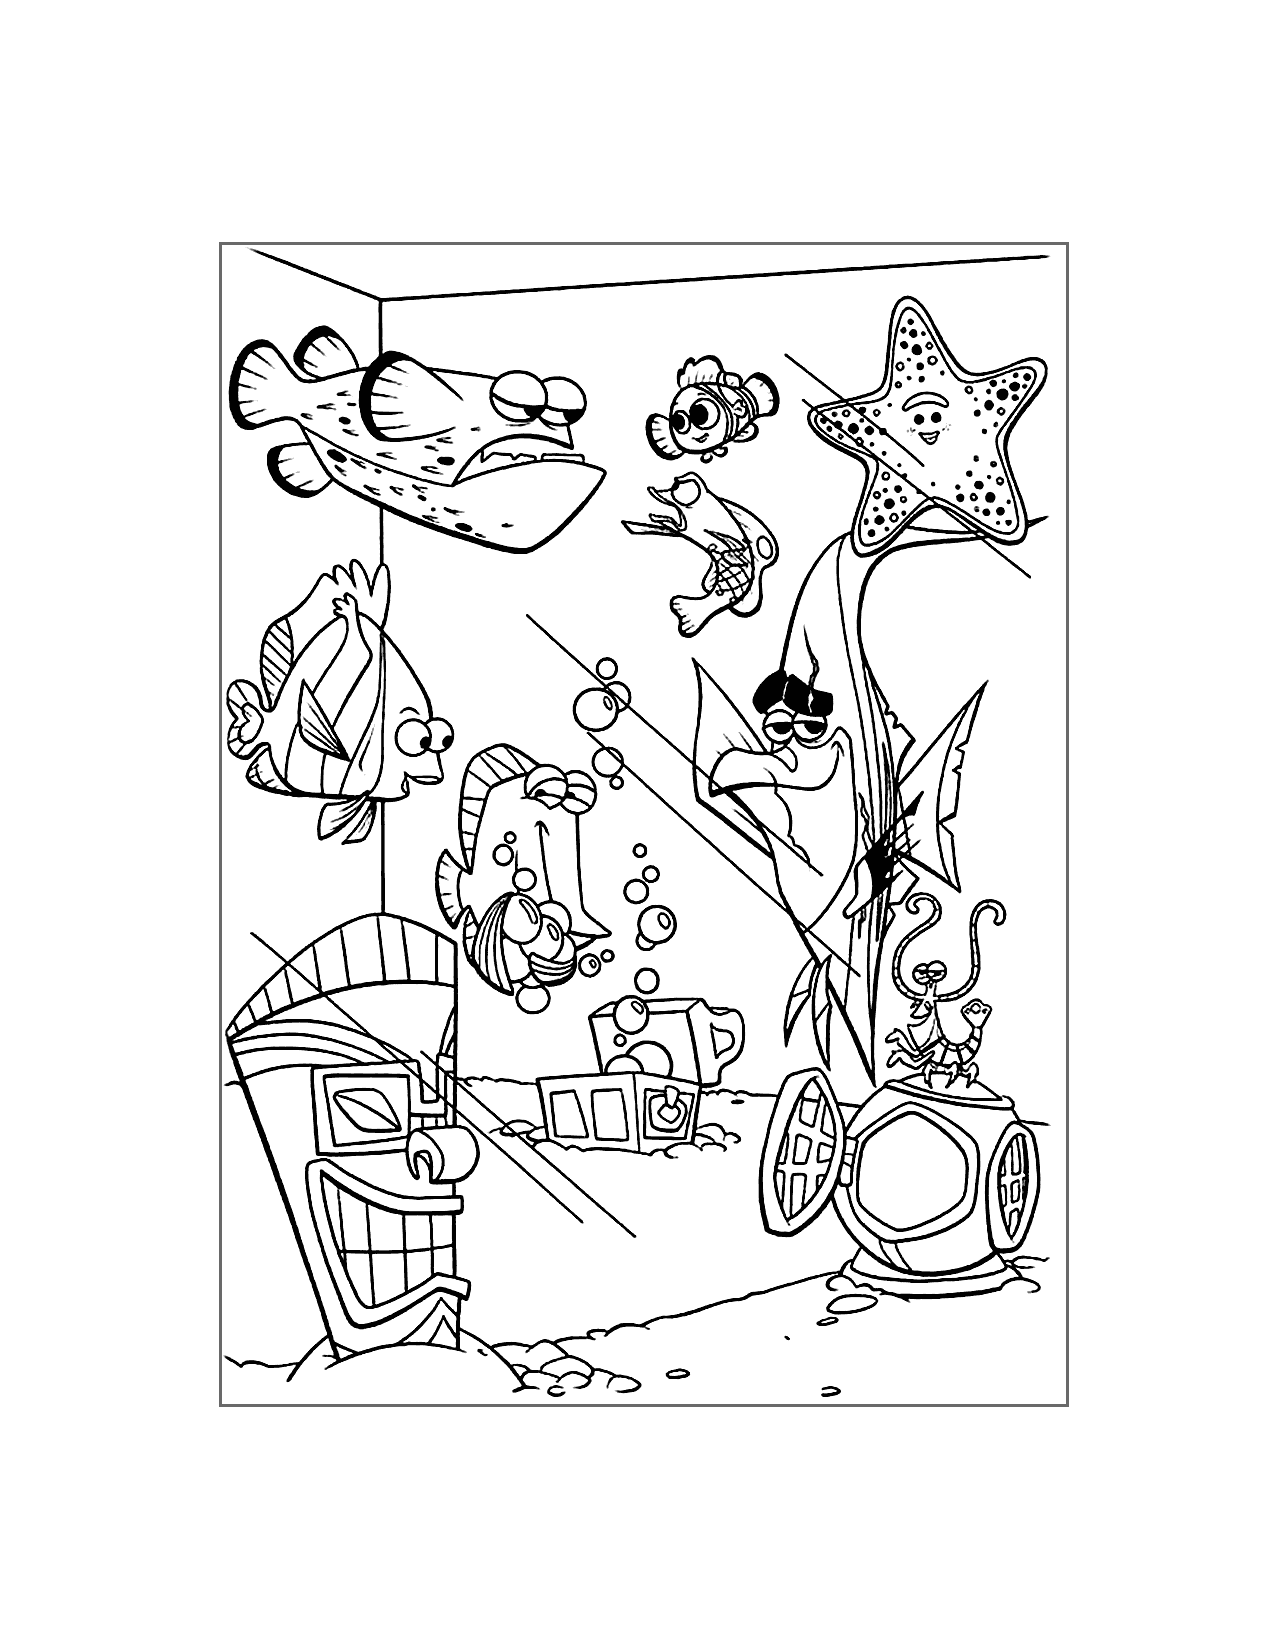 Finding Nemo Fishtank Coloring Page